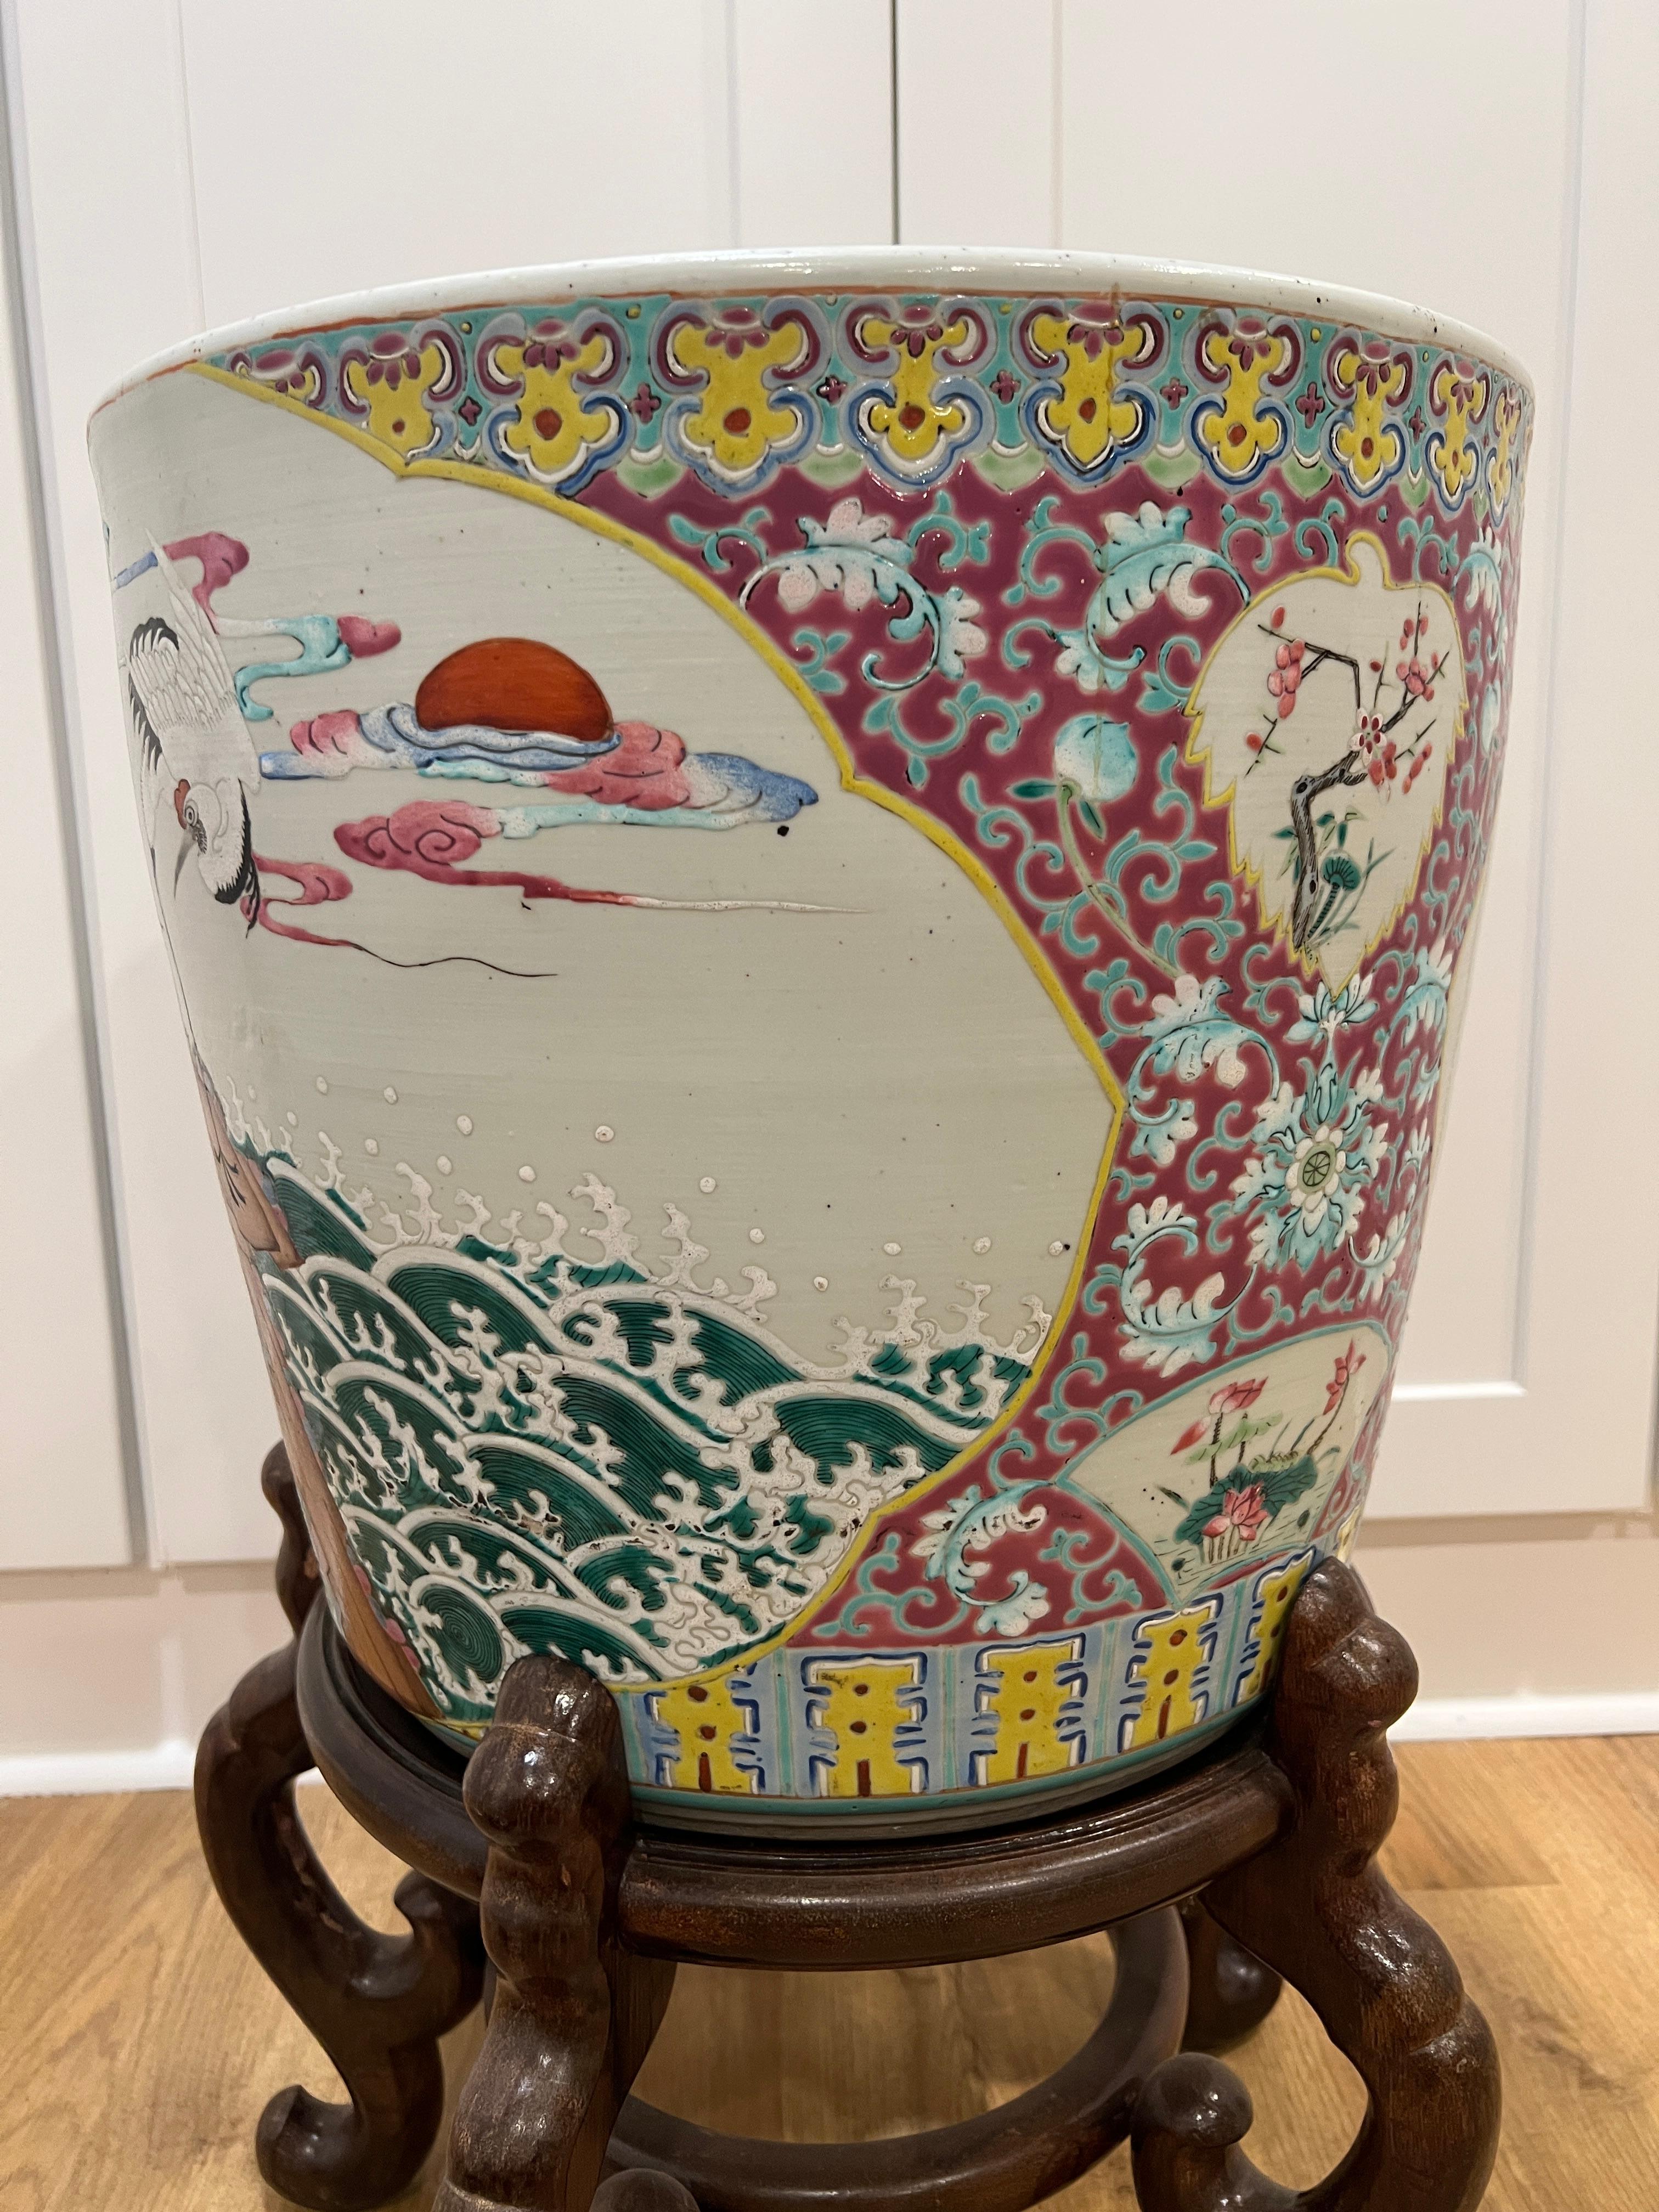 Enamel 19th Century, Chinese Export Famille Rose Porcelain Planter or Fish Bowl For Sale